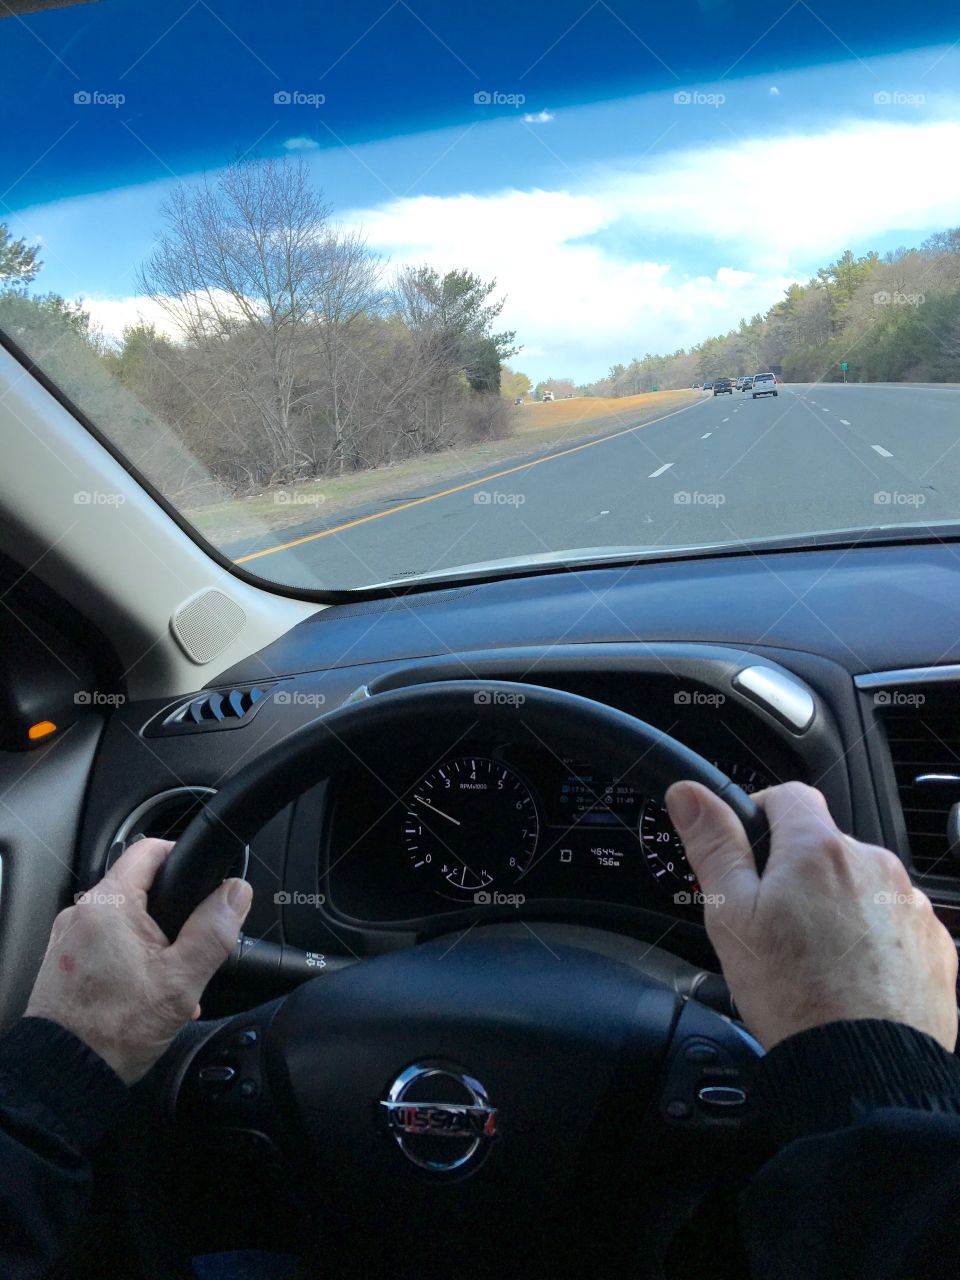 View from drivers seat going down highway!

My husband's hands on our Nissans steering wheel as we drive on divided three lane highway. Trees still have no leaves on them even though today was the 1st day of Spring.